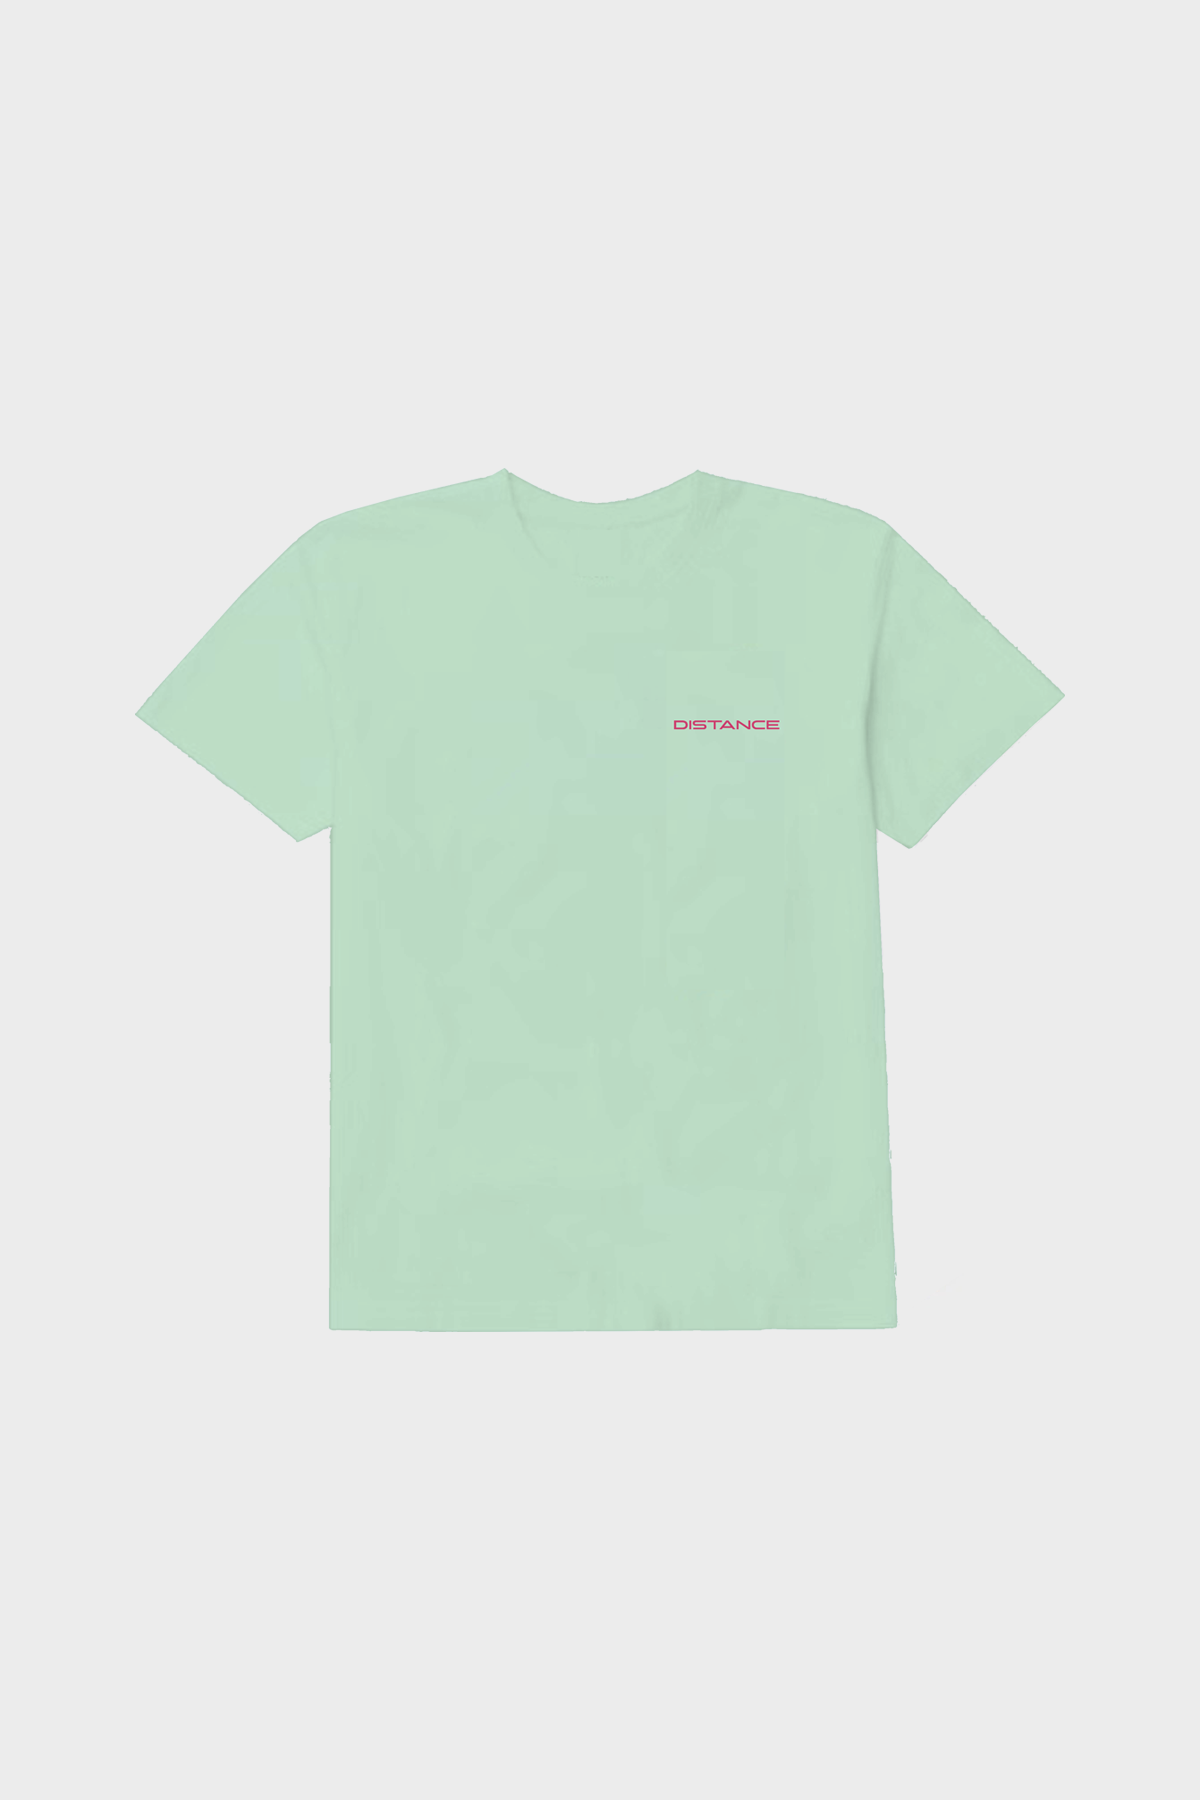 DISTANCE - SQUIGGLE ROPE TEE